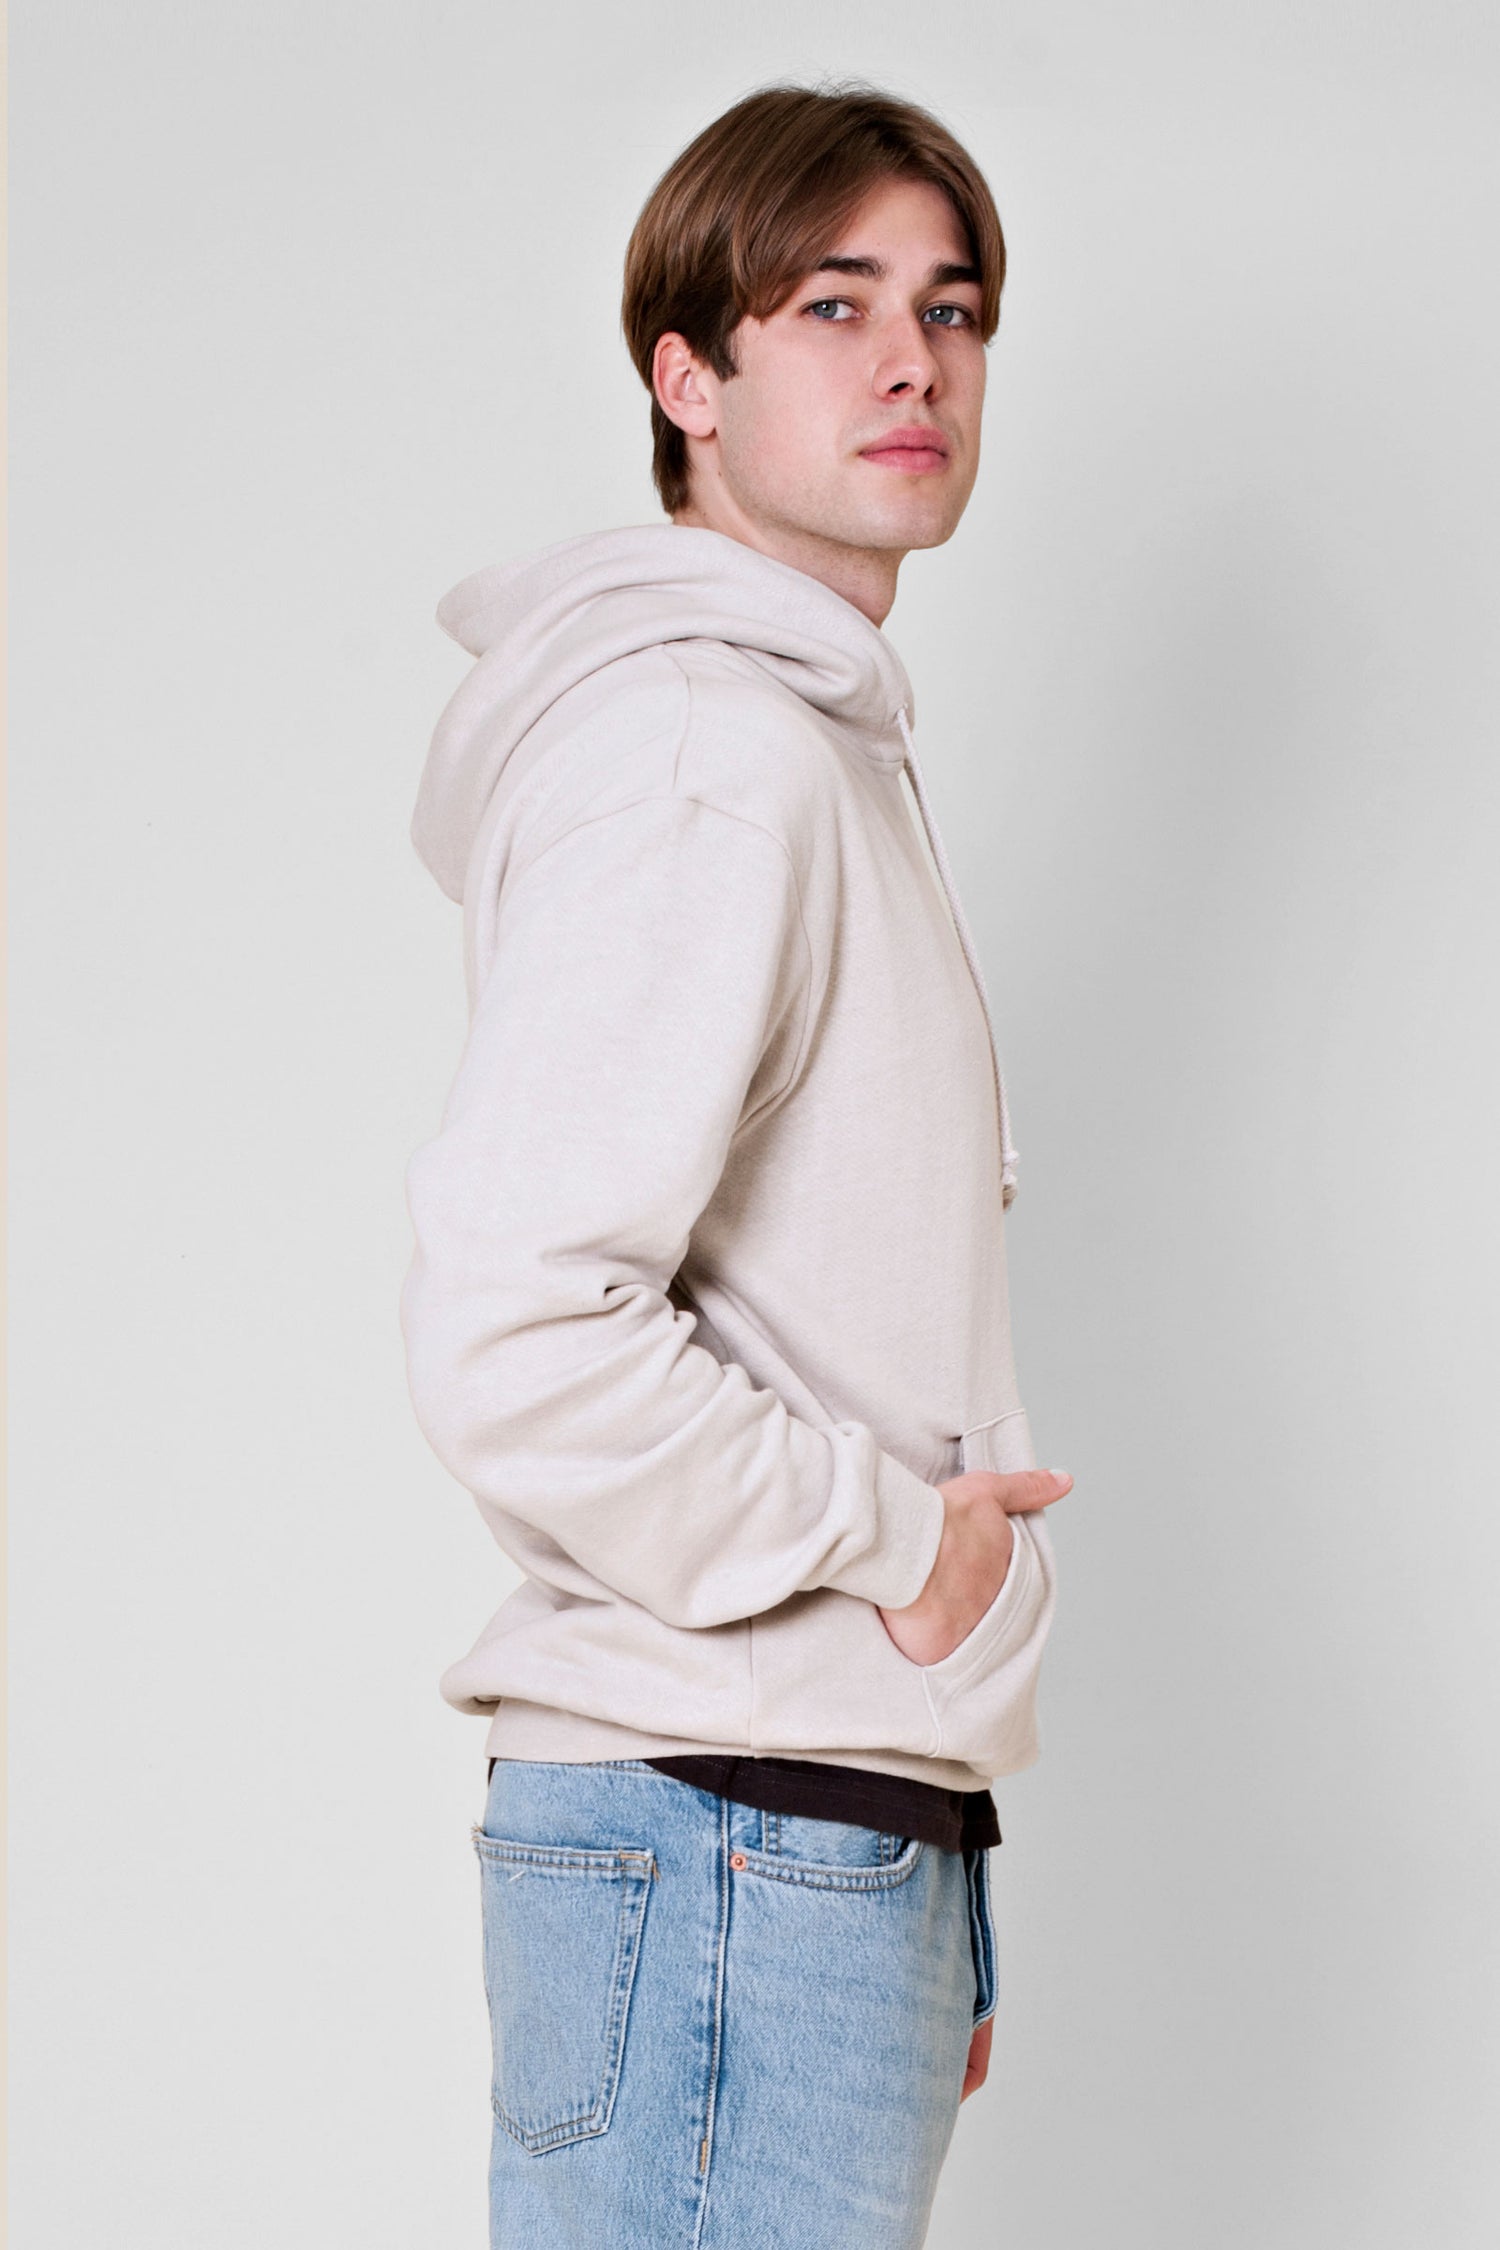 Experience the ultimate comfort of this soft combed hemp and organic cotton fleece hooded sweatshirt in a muted concrete color.